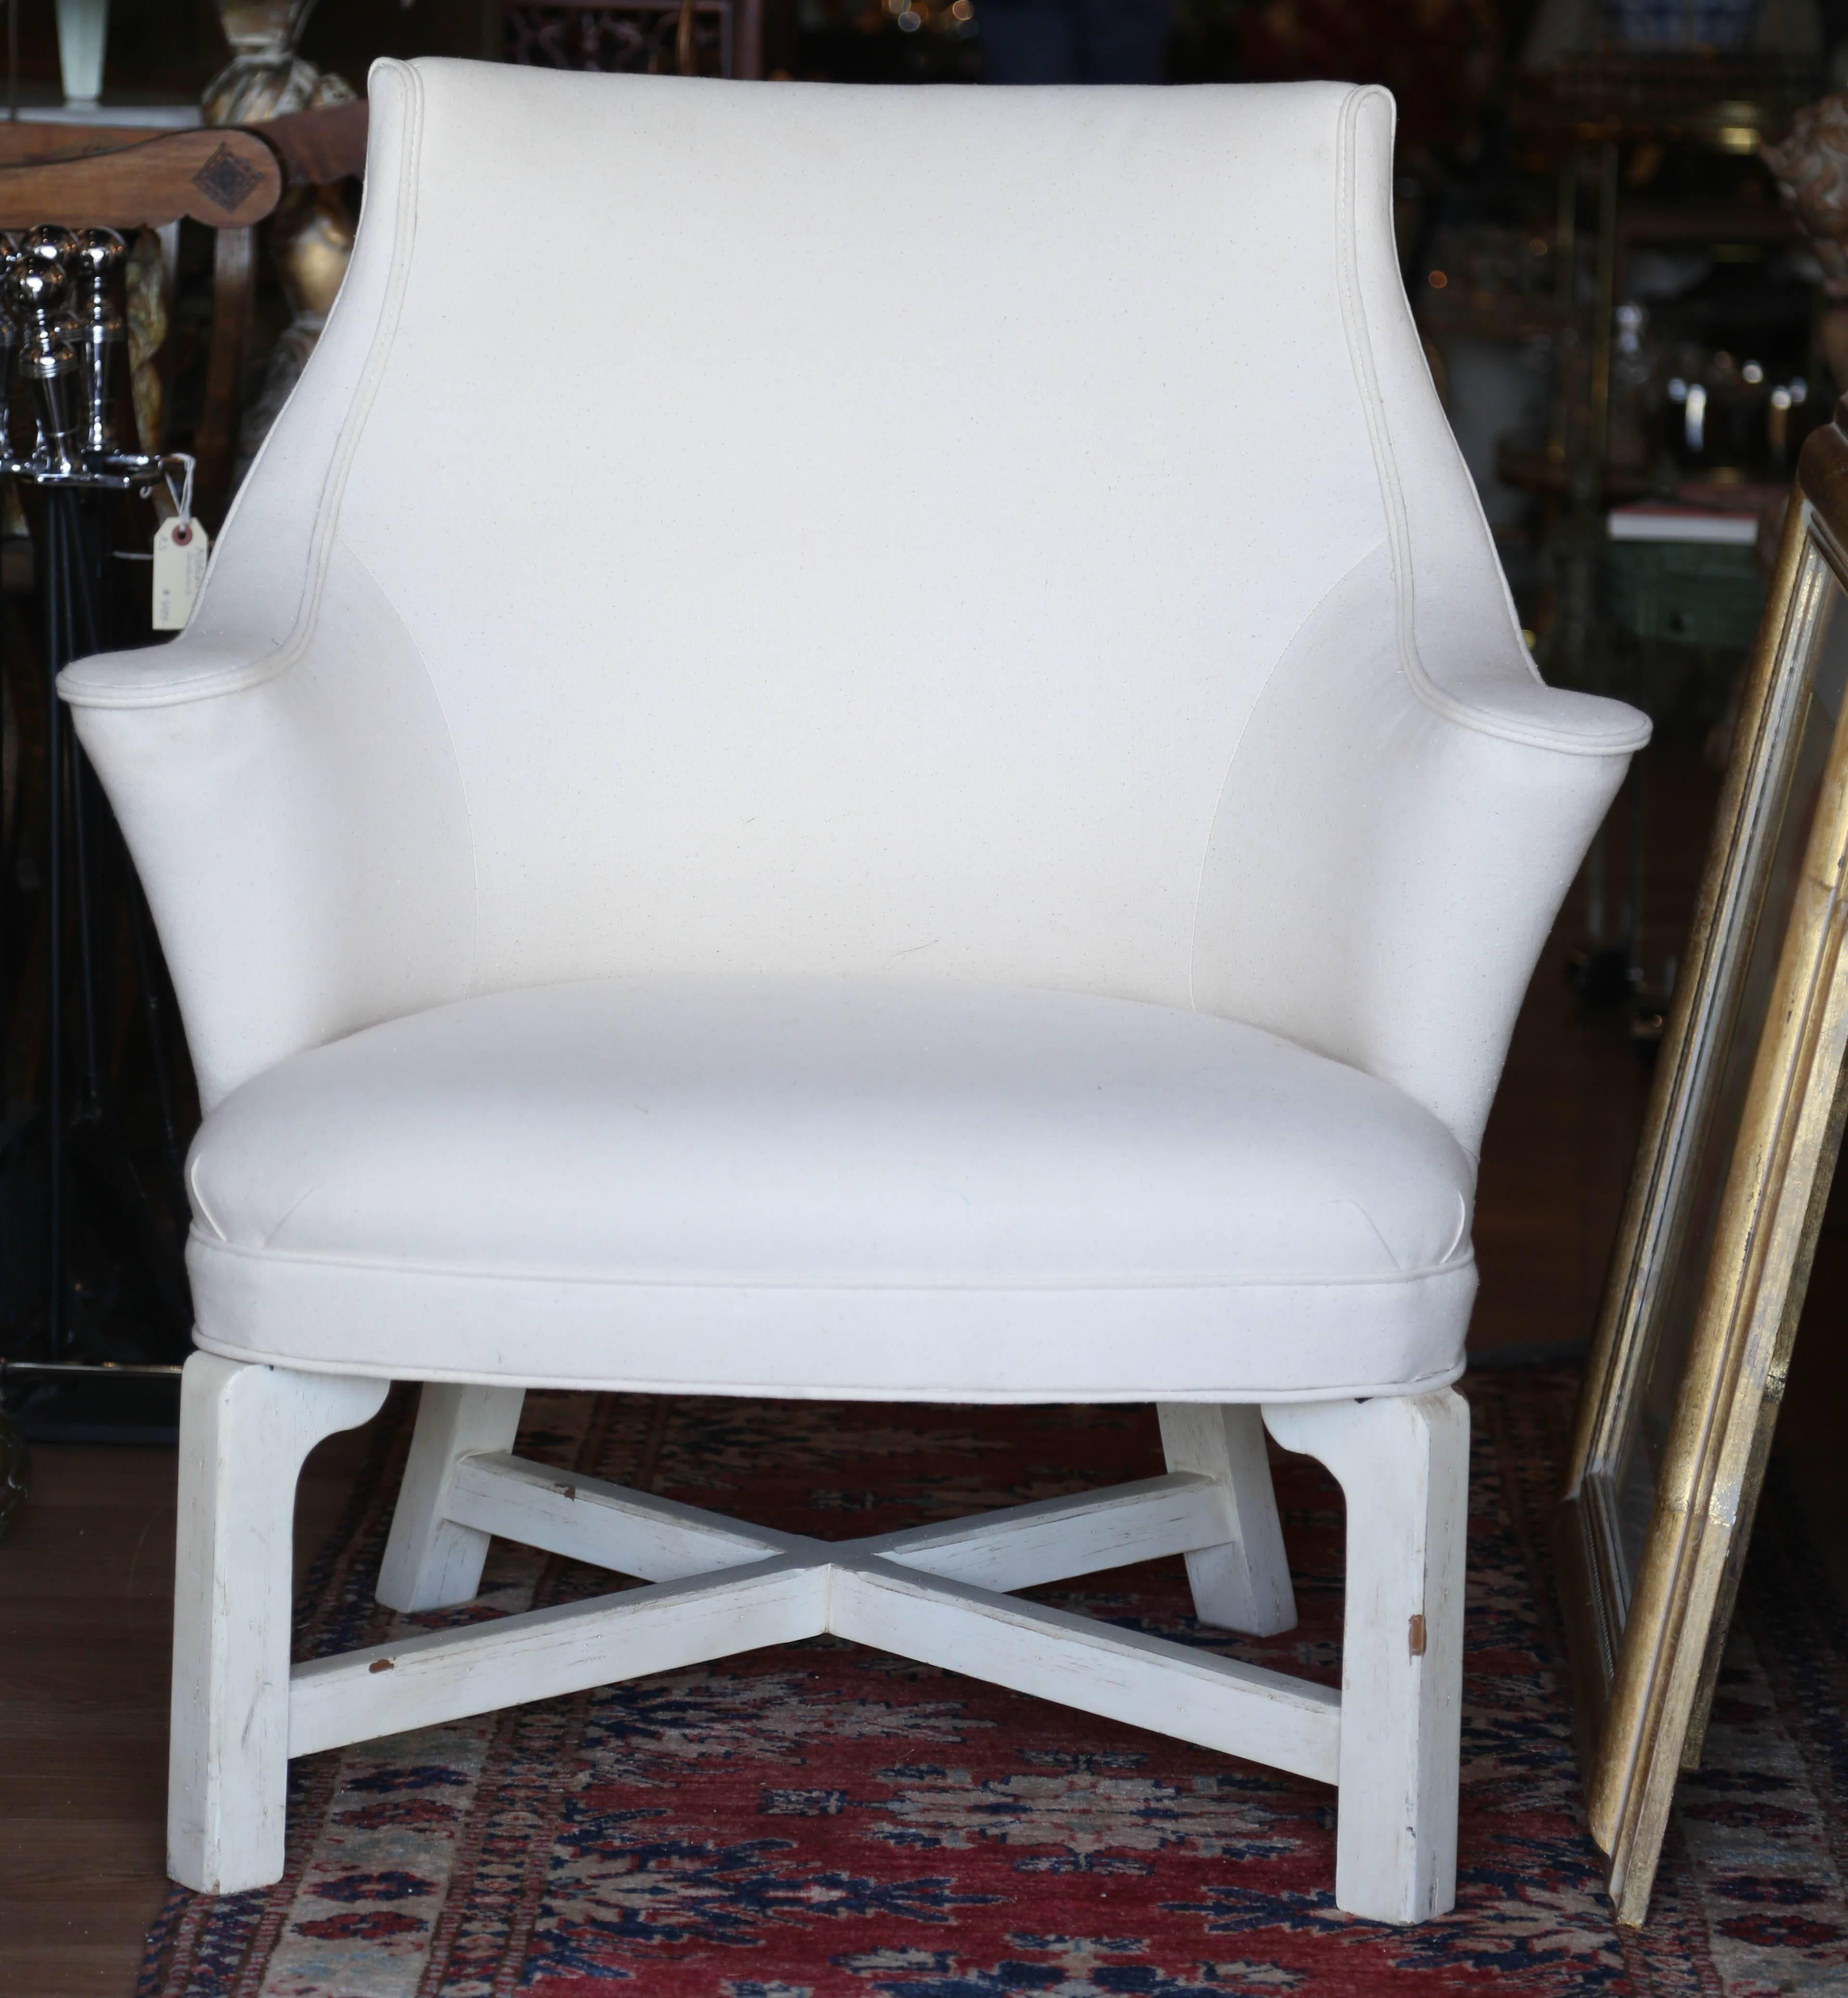 Charming pair of vintage slipper chairs by Century. Newly upholstered in off-white cotton fabric.